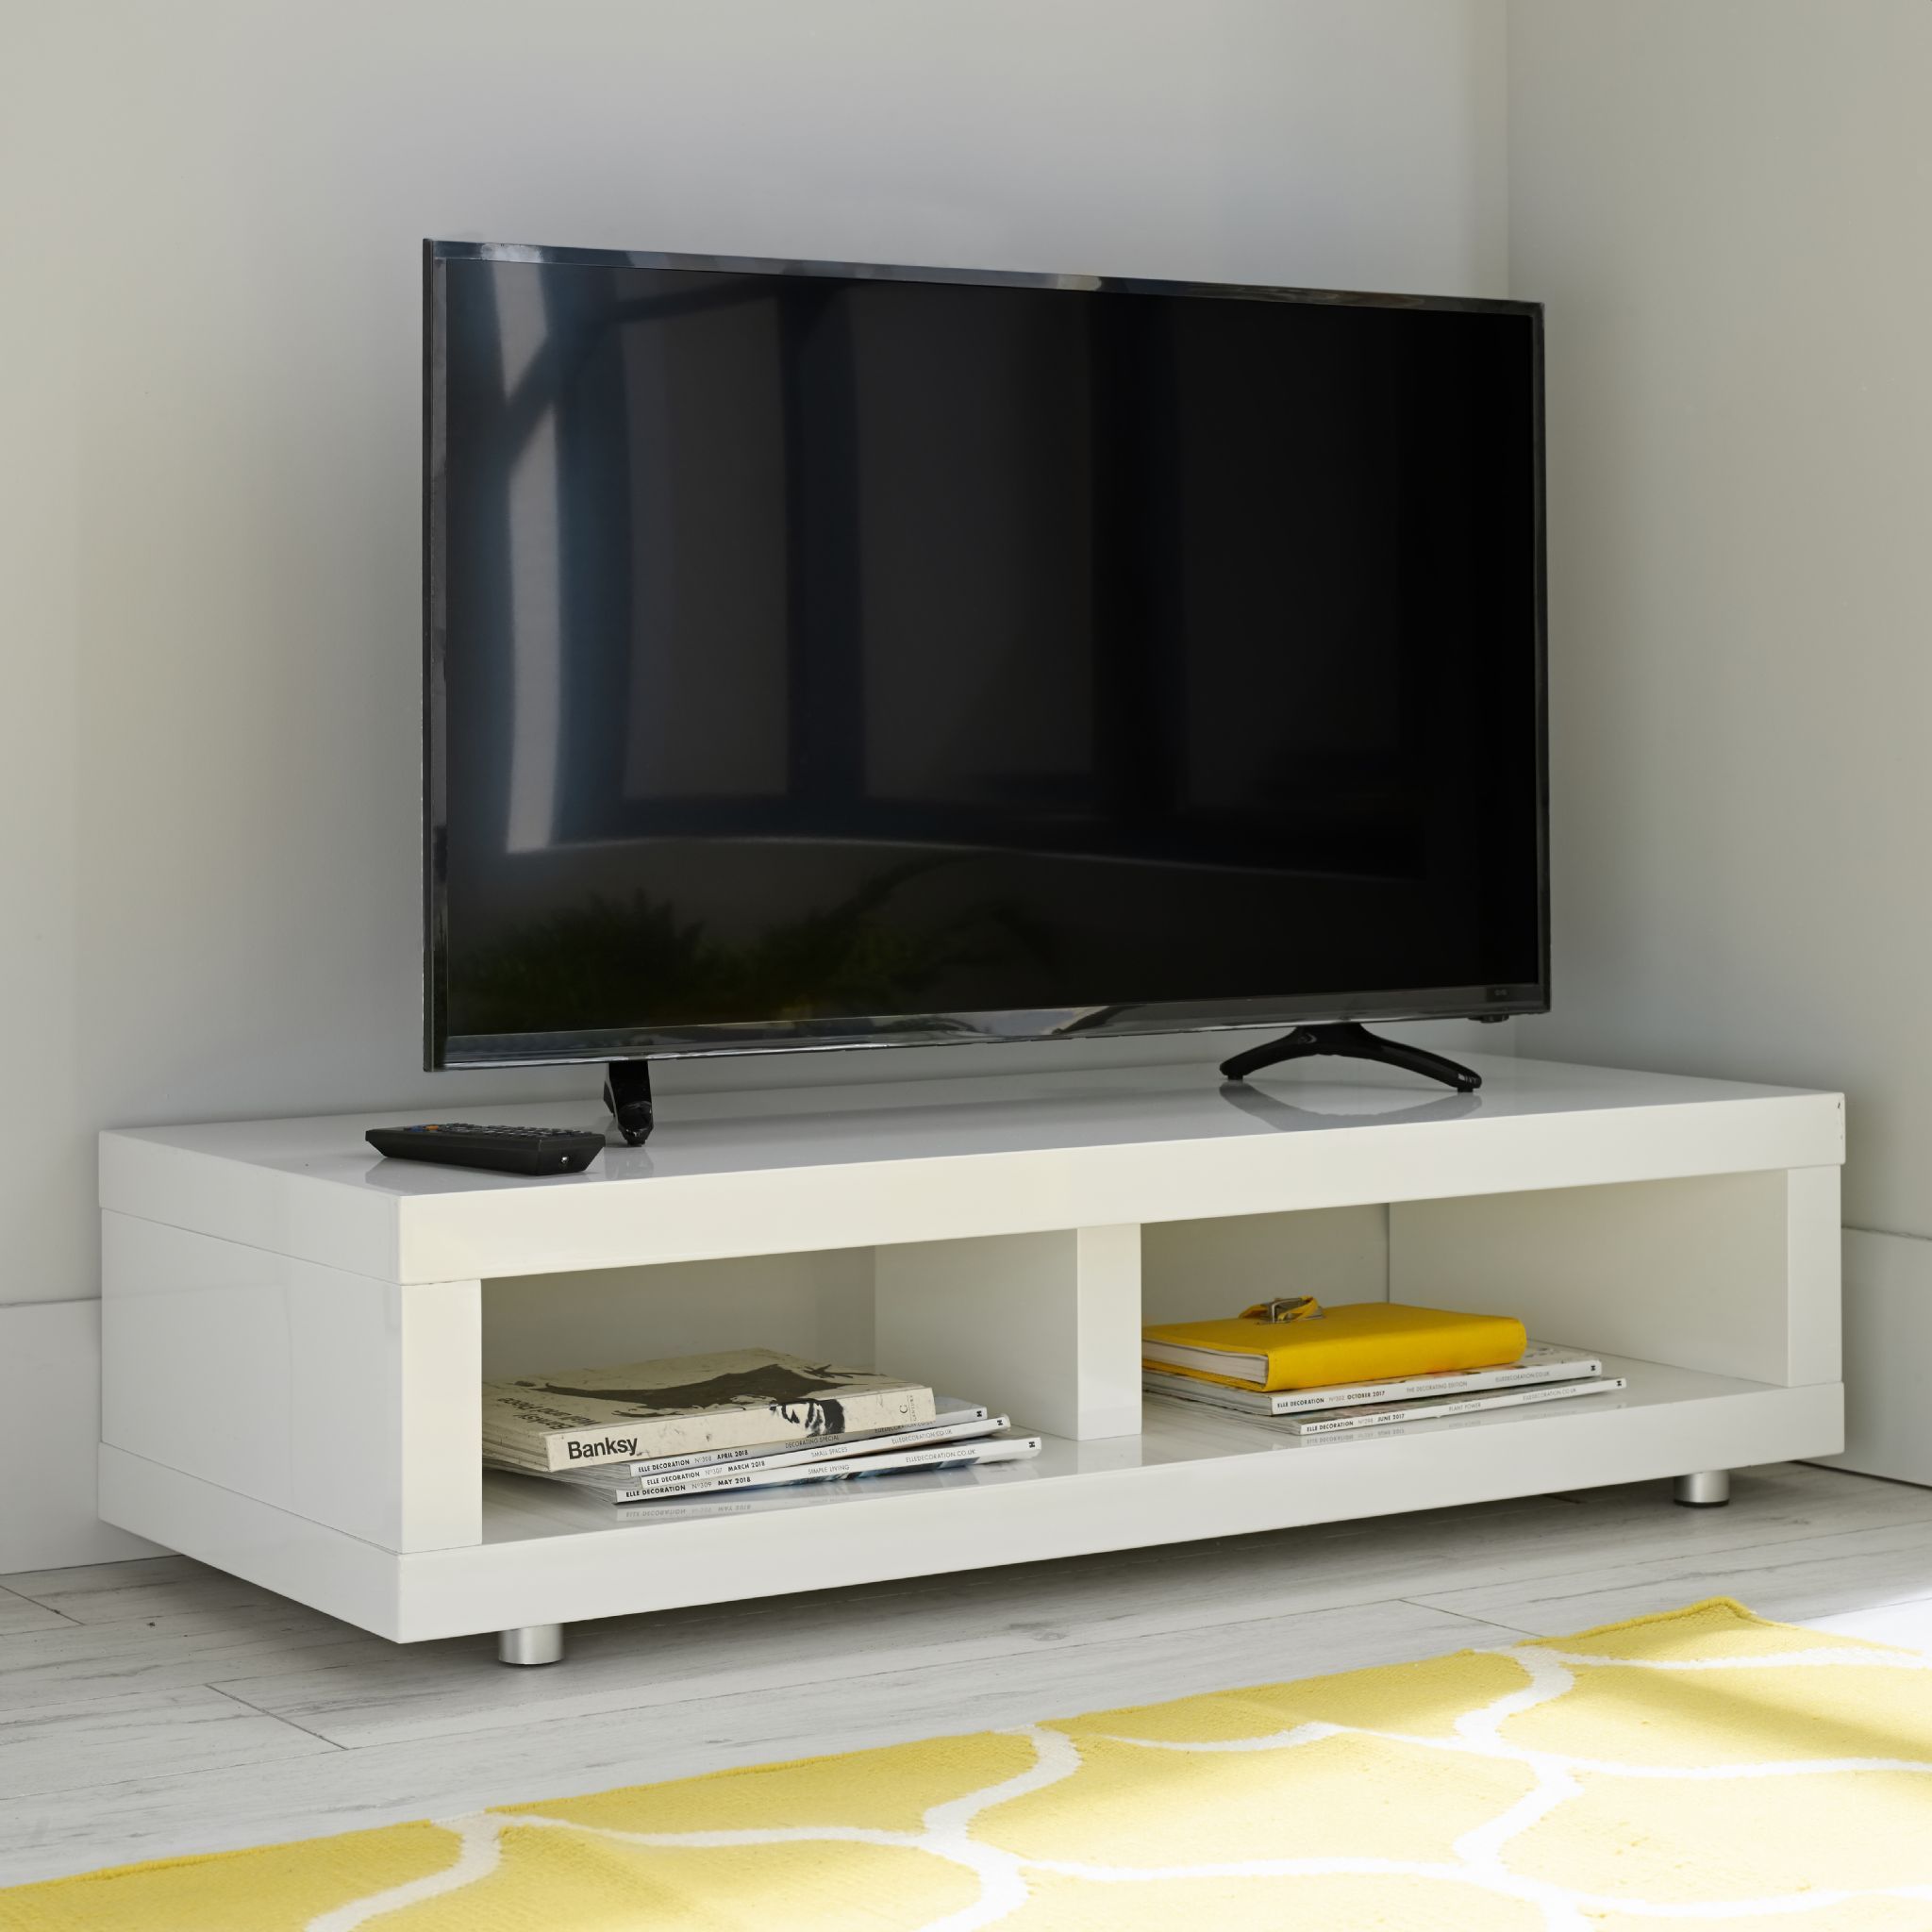 High Gloss Contemporary White Tv Television Stand Unit Cabinet Regarding Stylish Tv Stands (View 6 of 15)